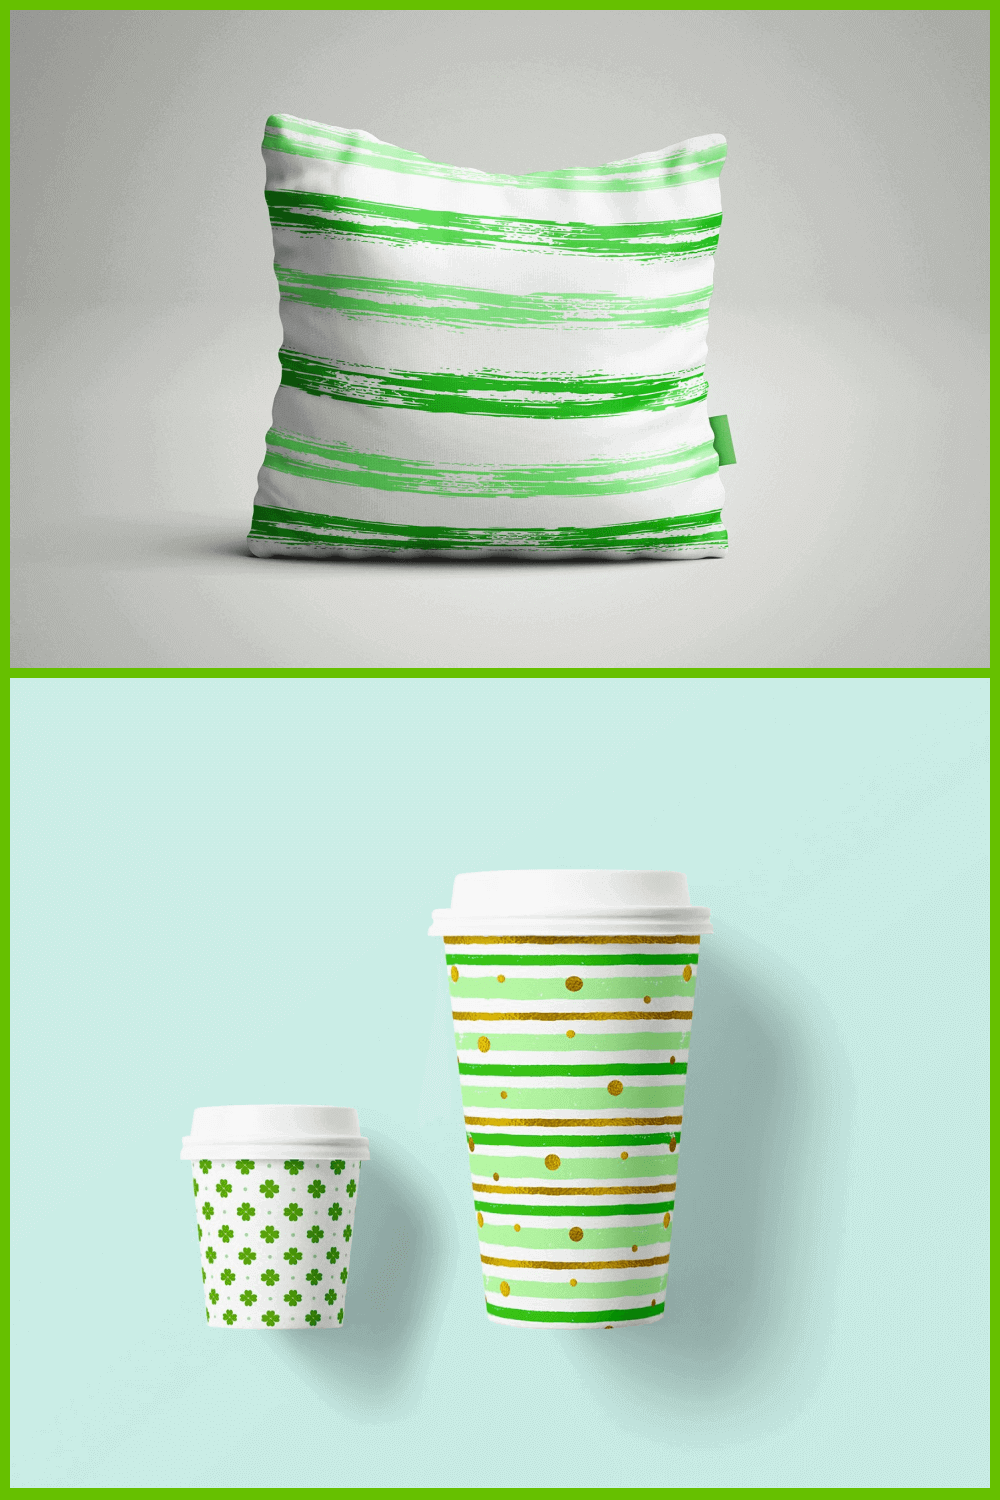 Pillow and Cups with Special Design.